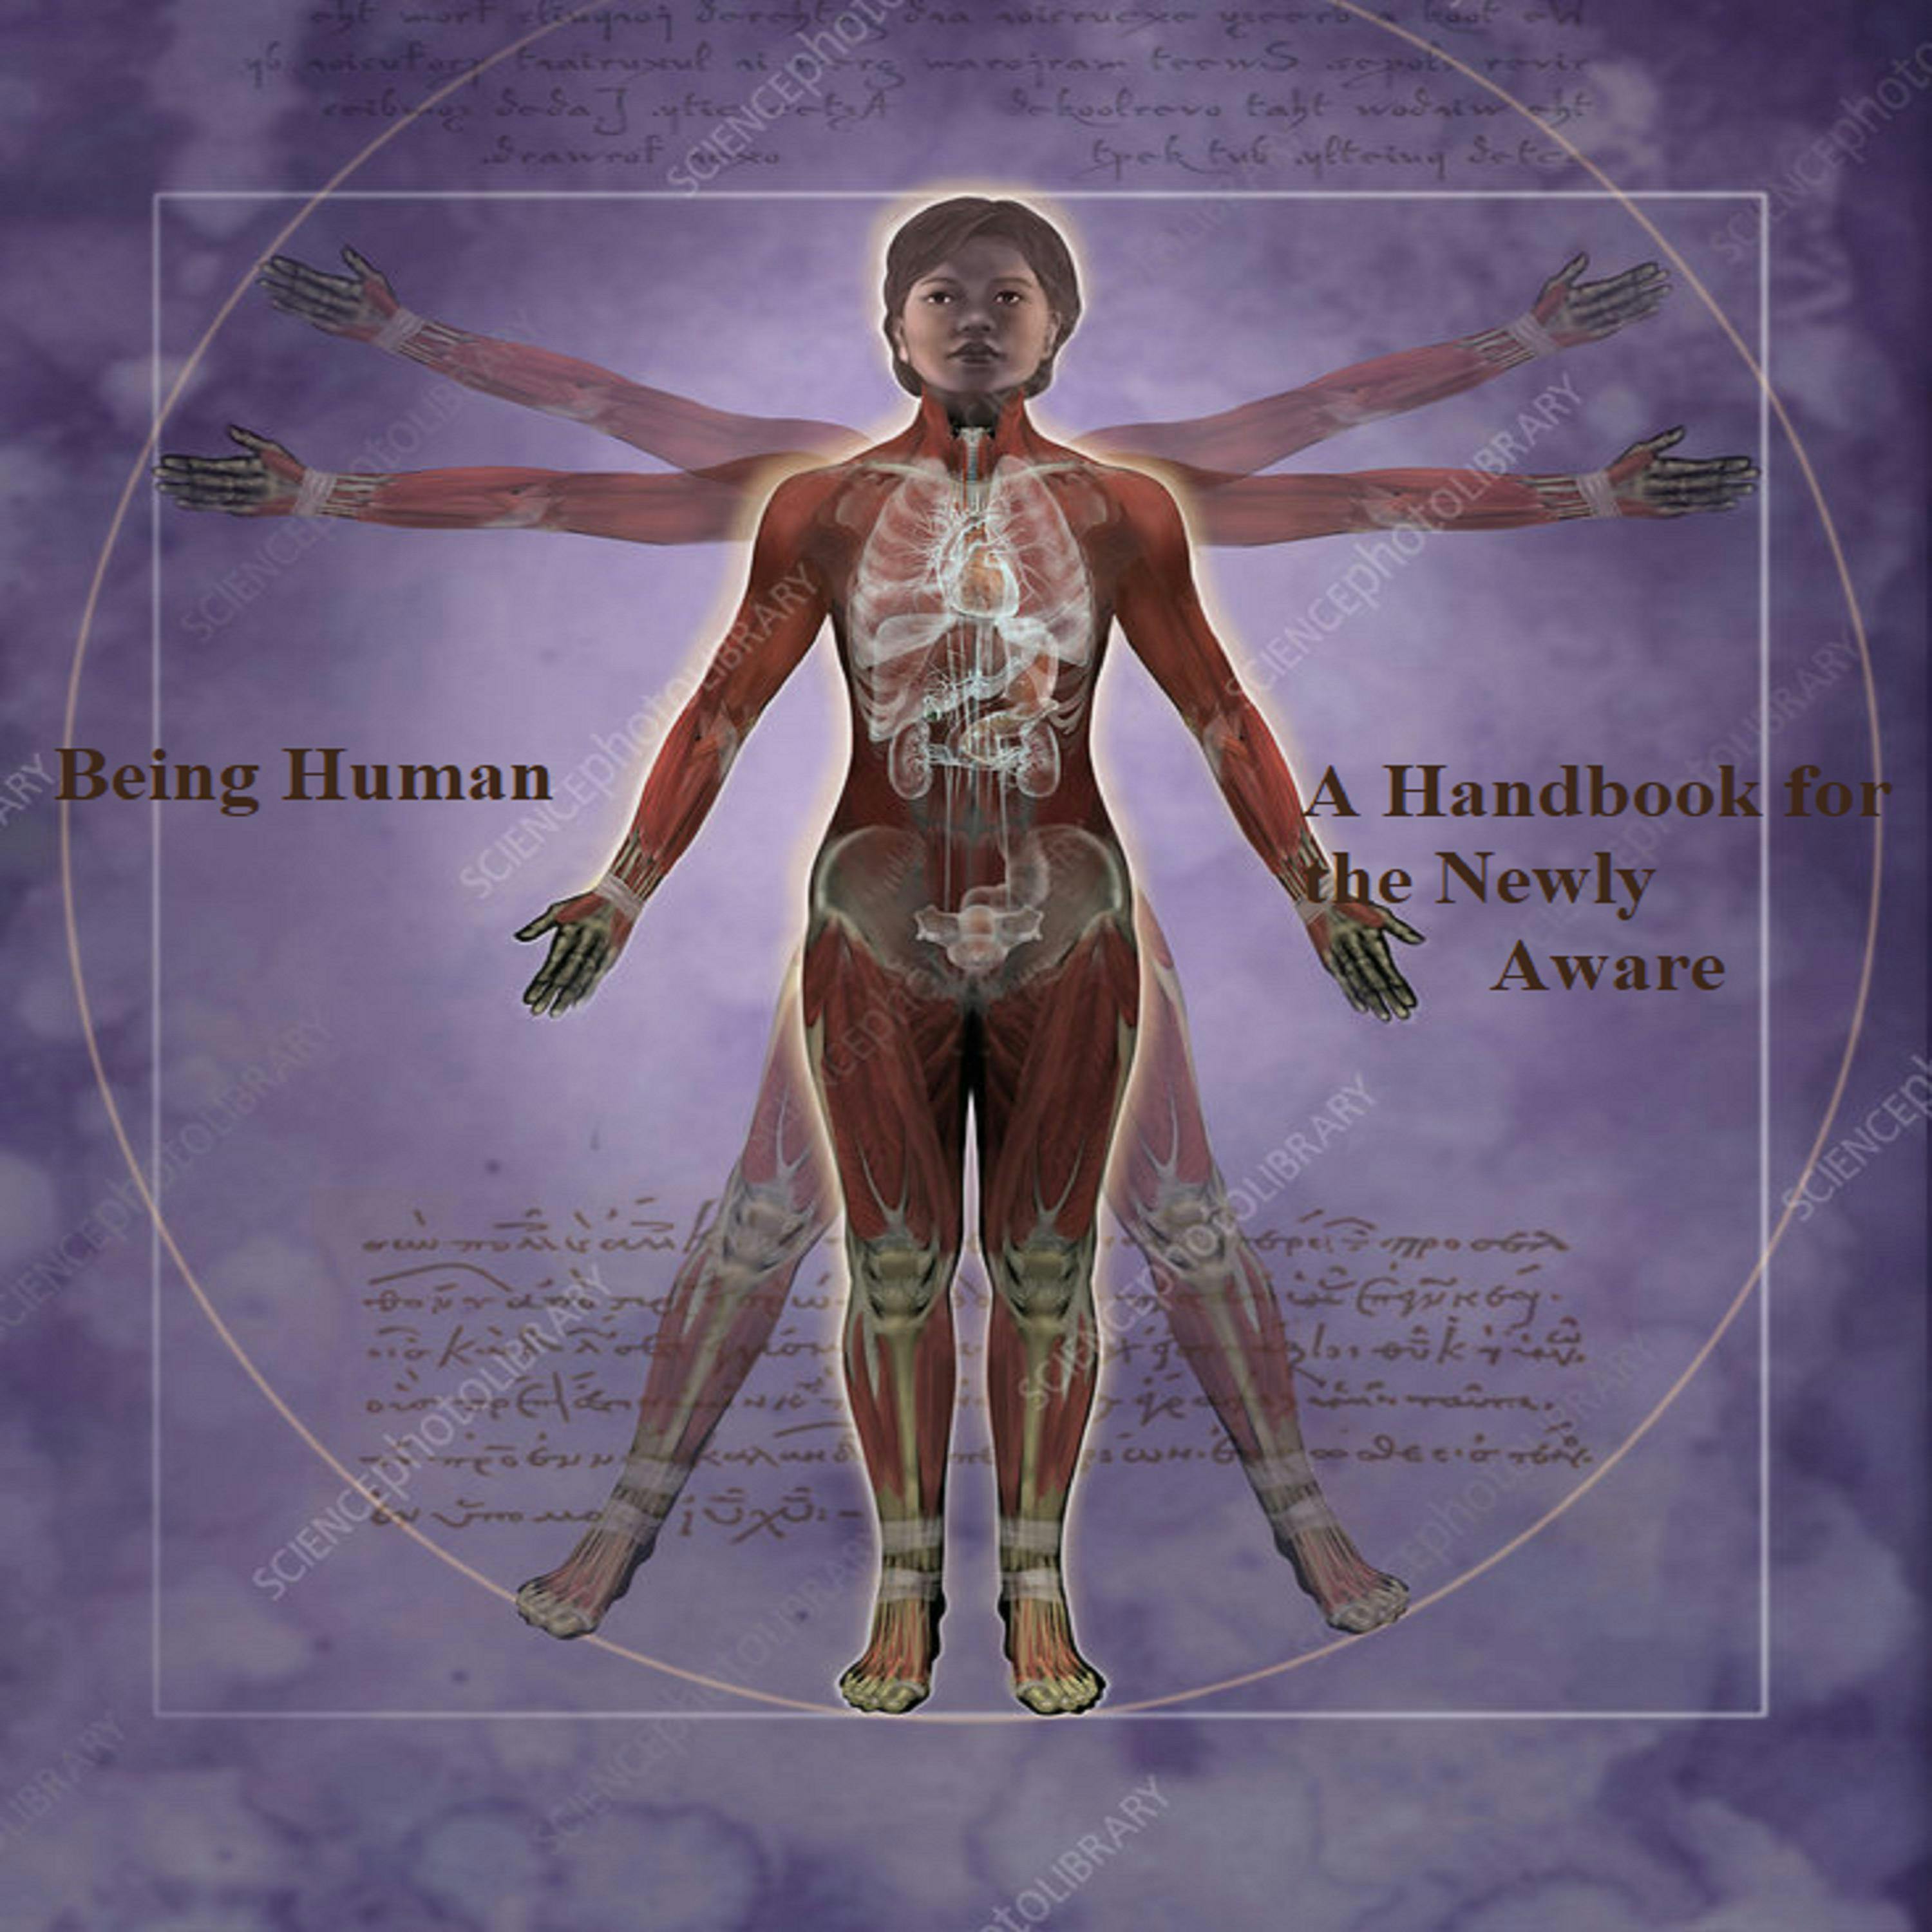 Being Human - A Handbook for the Newly Aware - Jacque G.